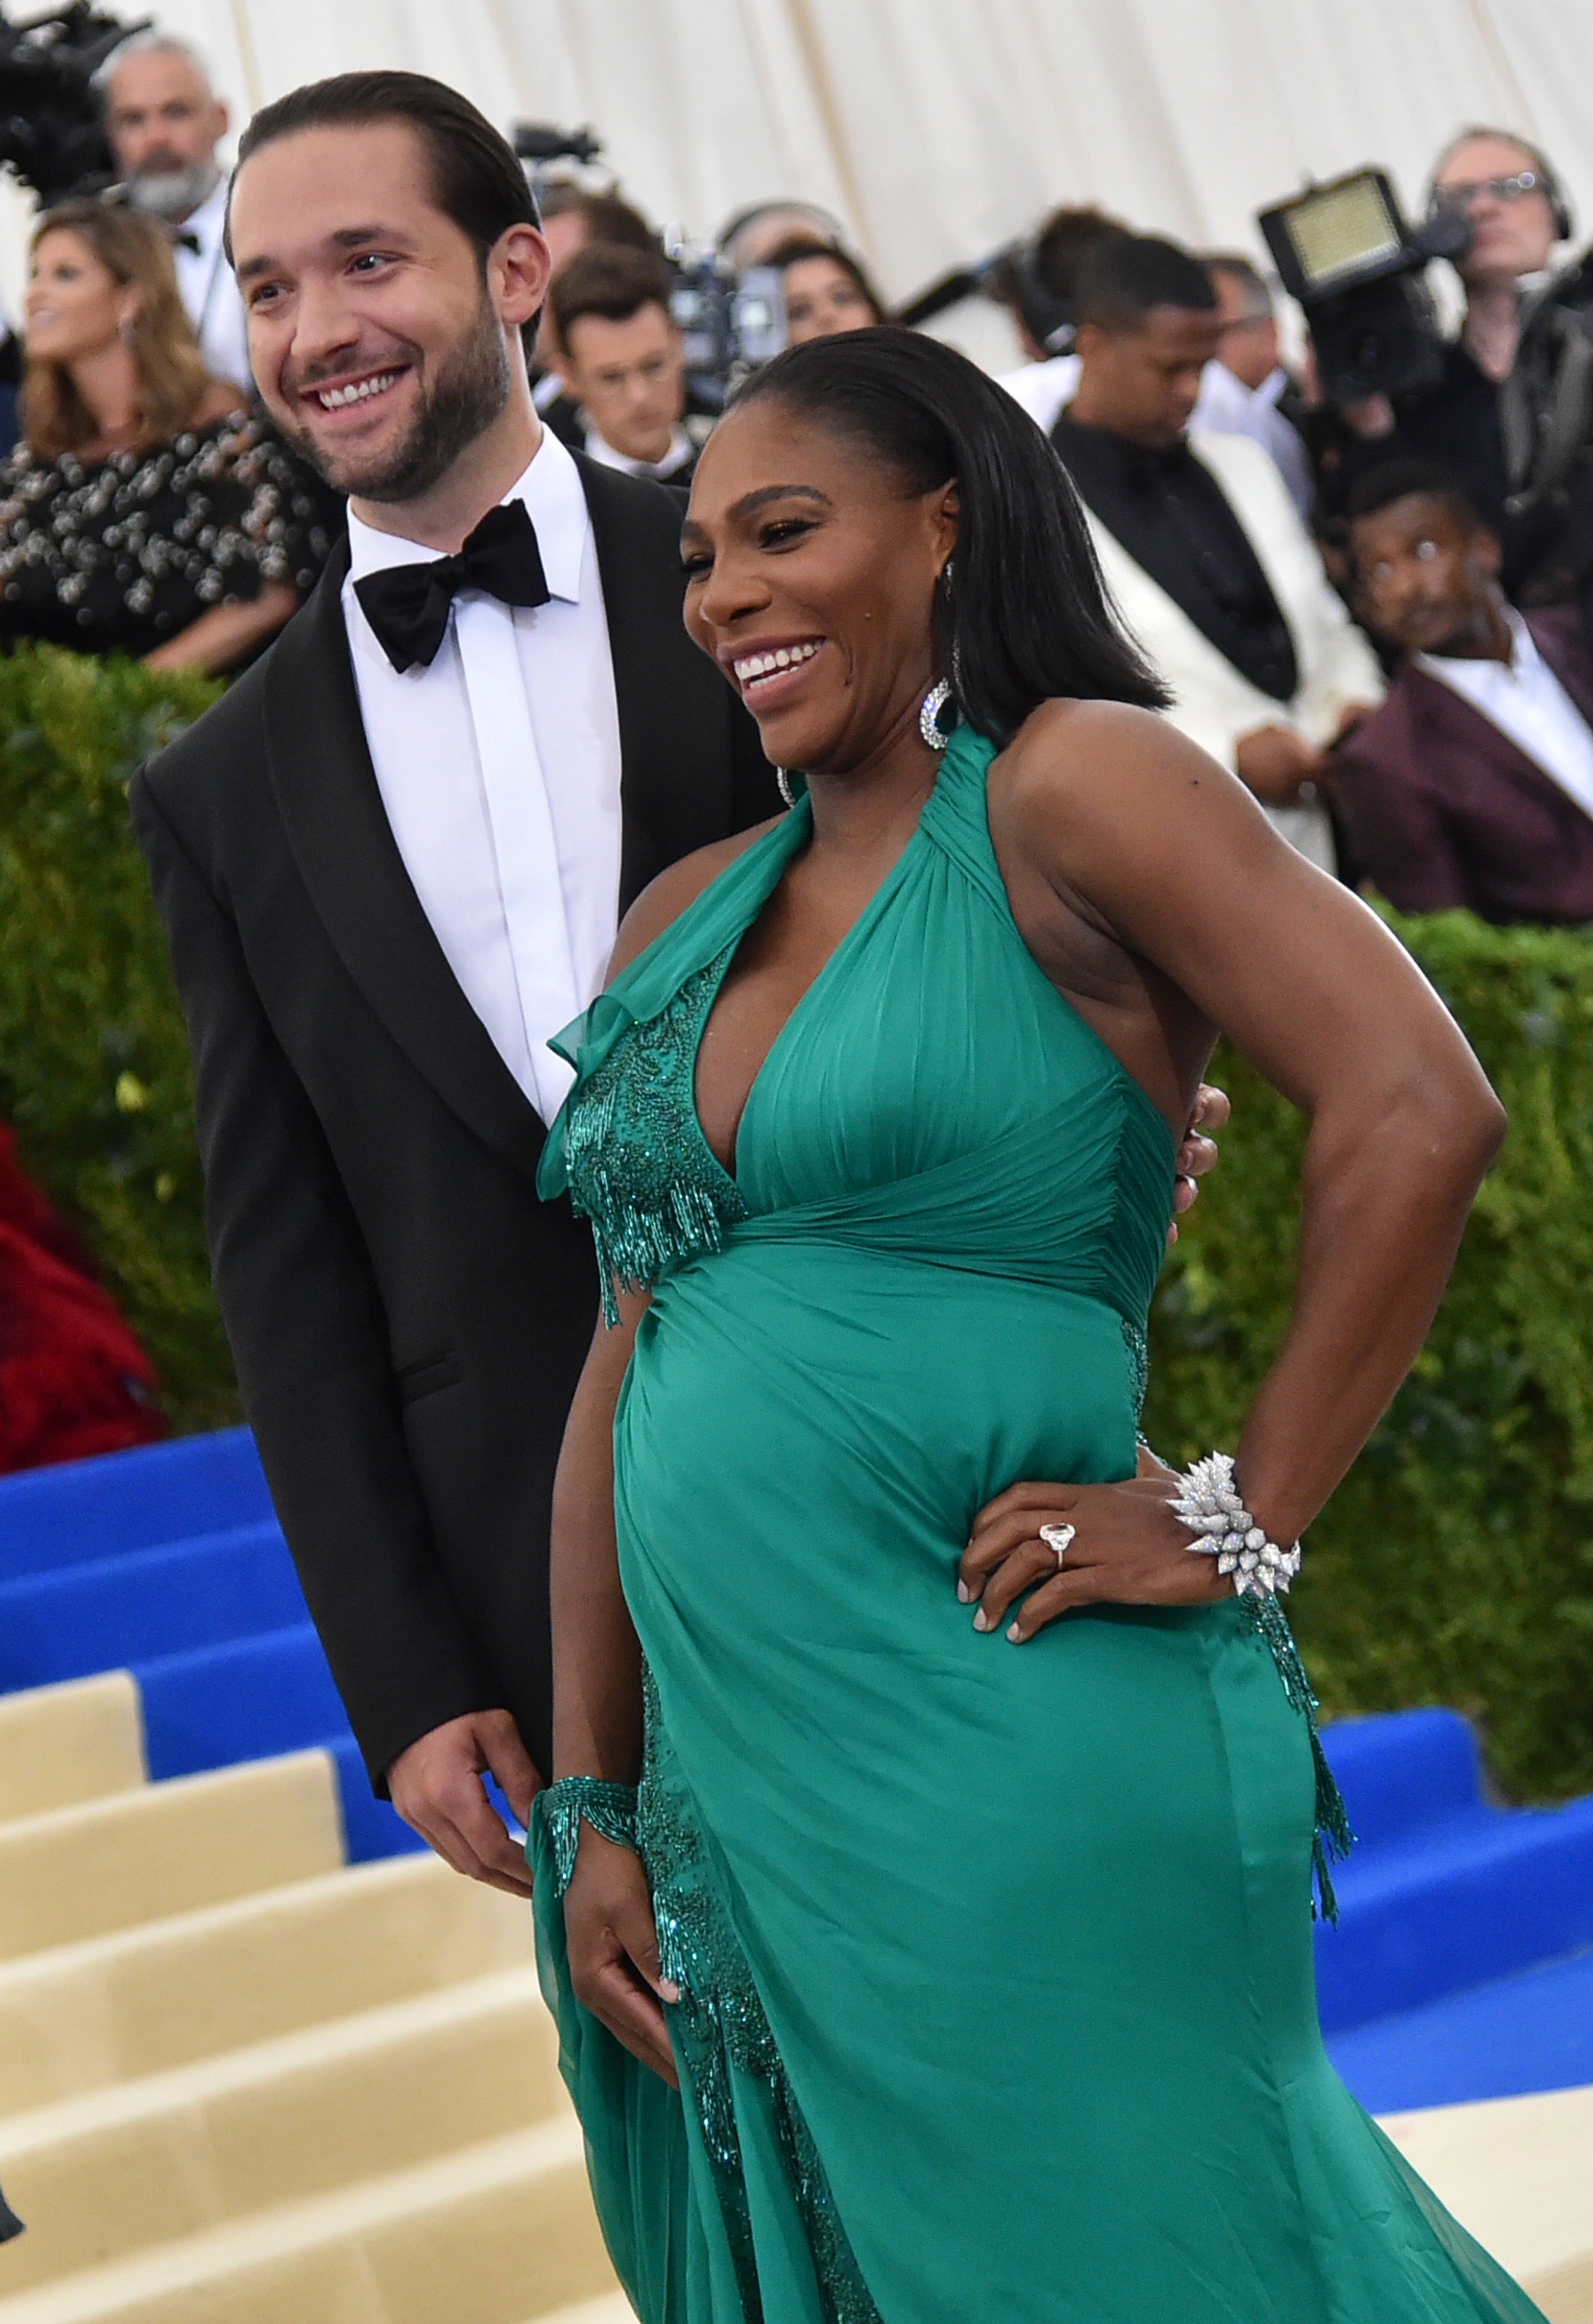 Serena Williams’ Fiancé Reveals That She Has the Healthiest Pregnancy Cravings Ever